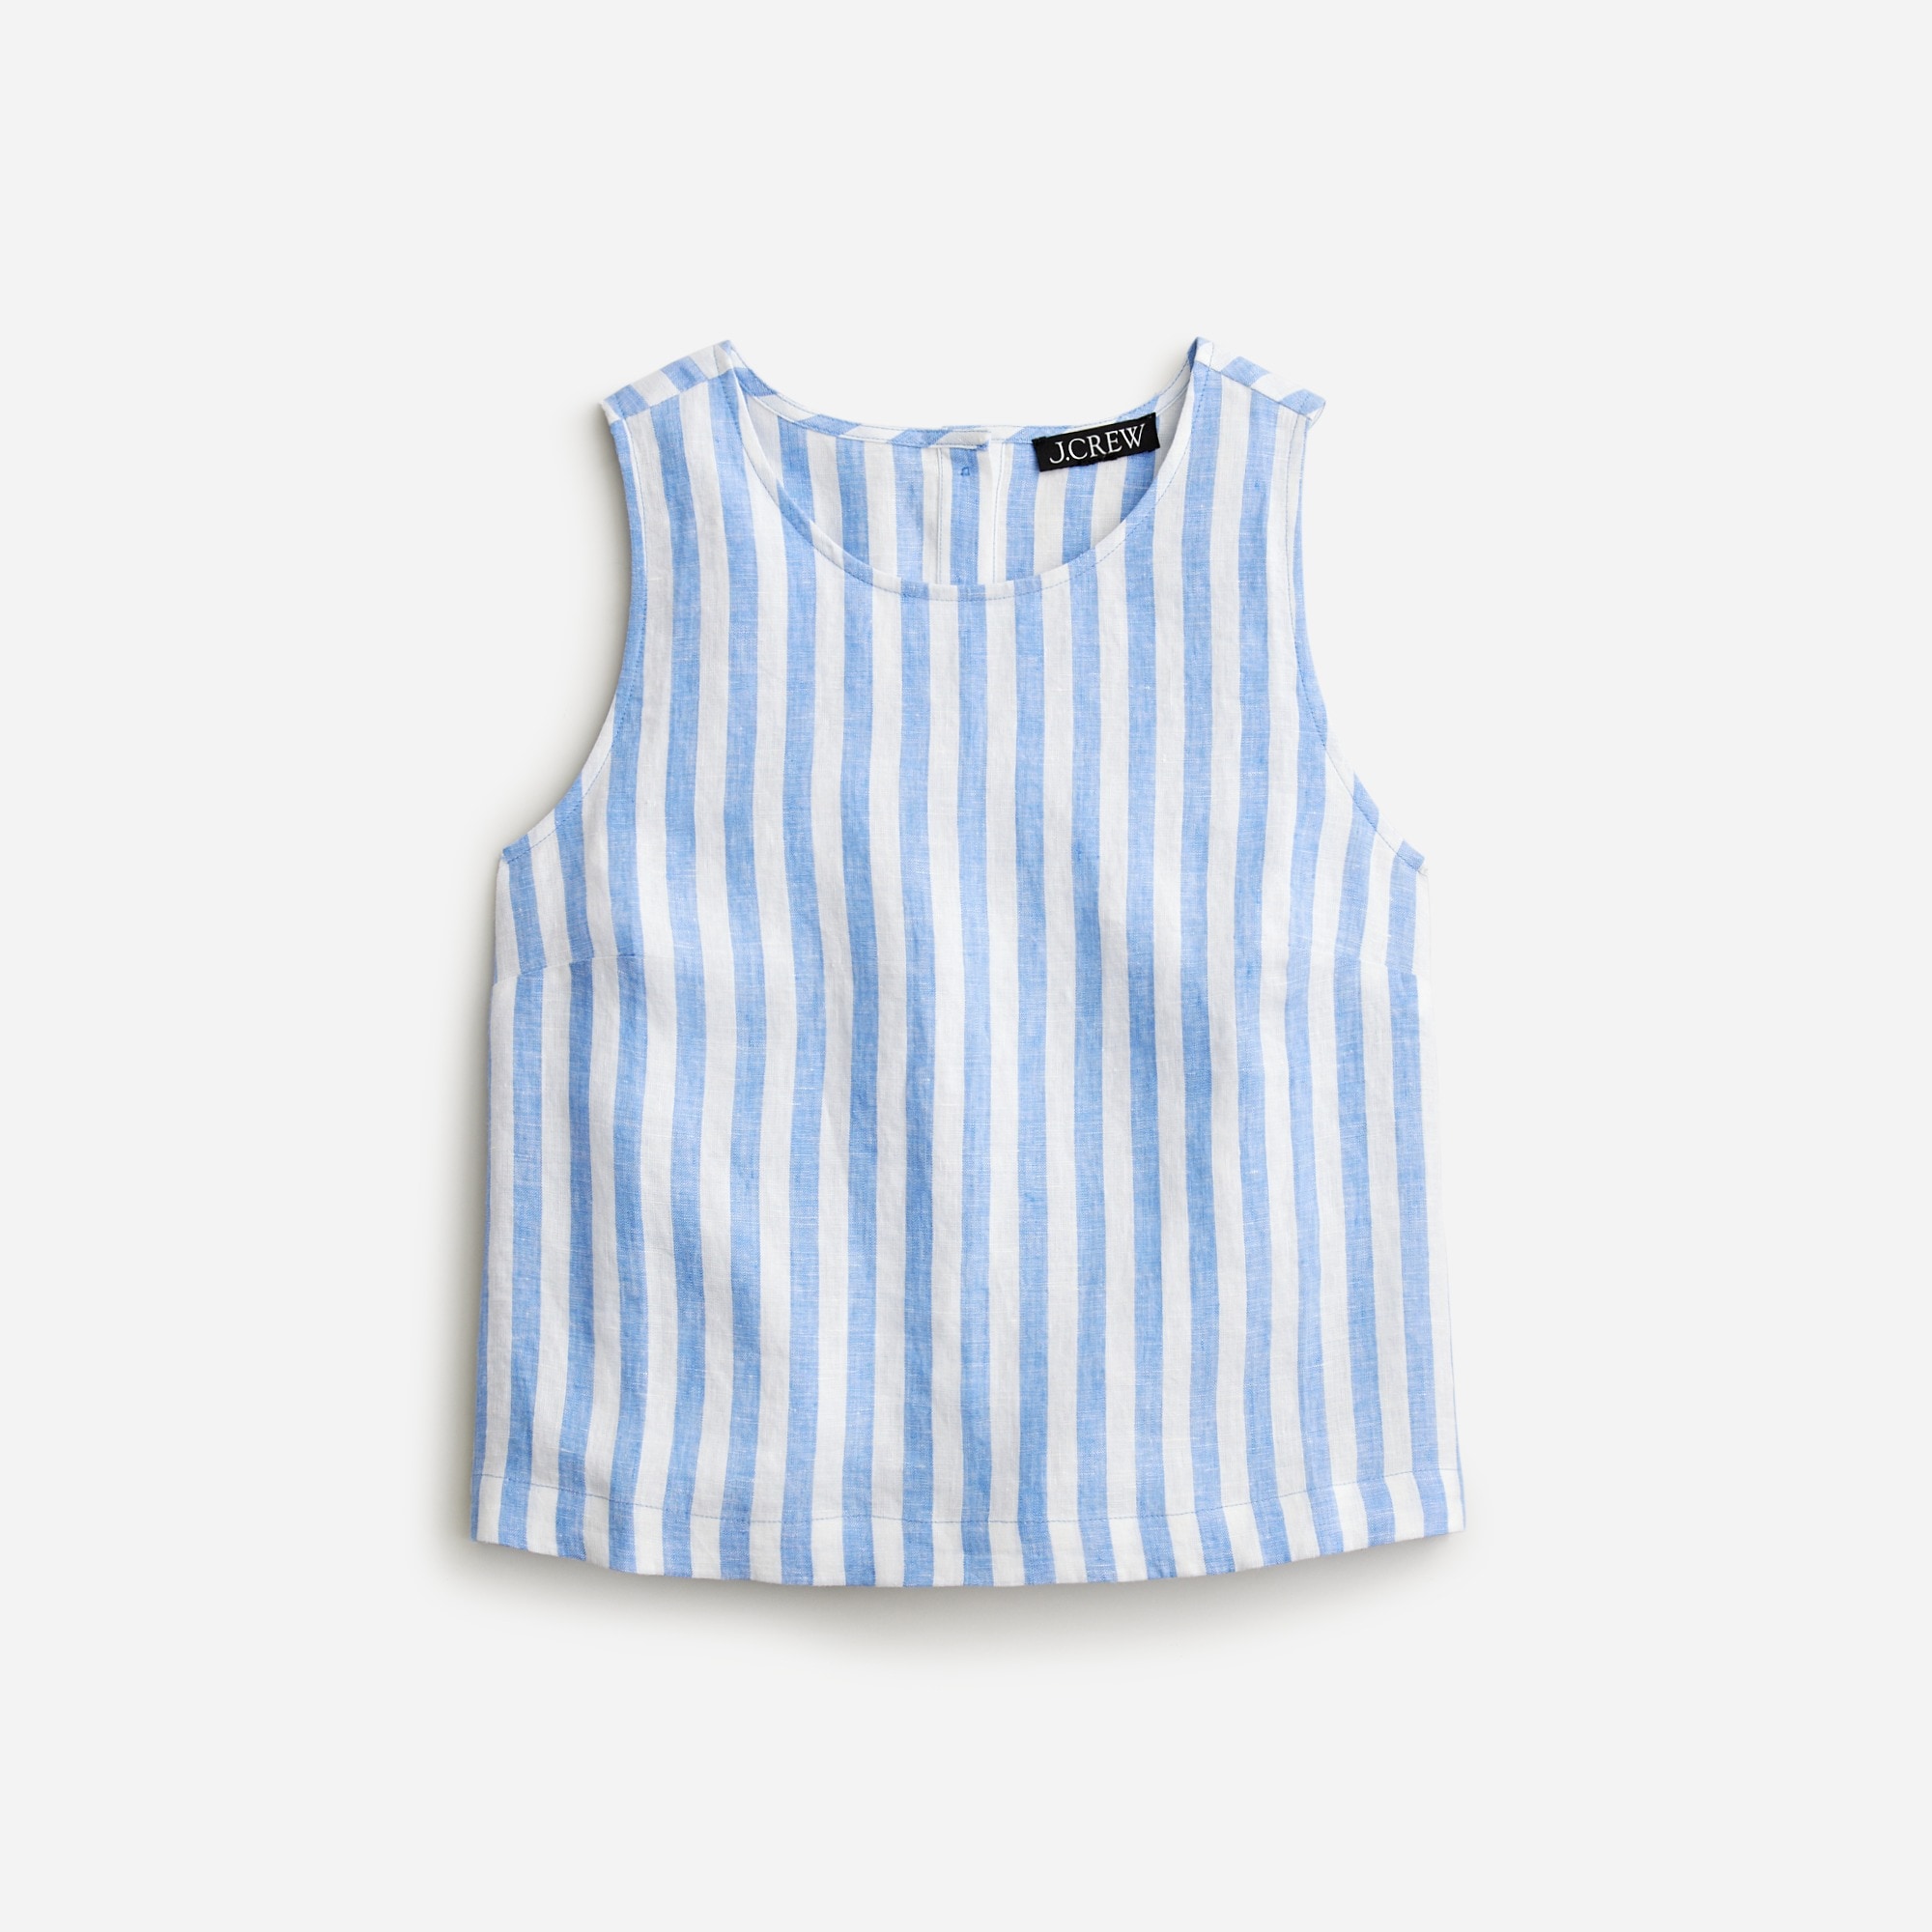  Maxine button-back top in striped linen